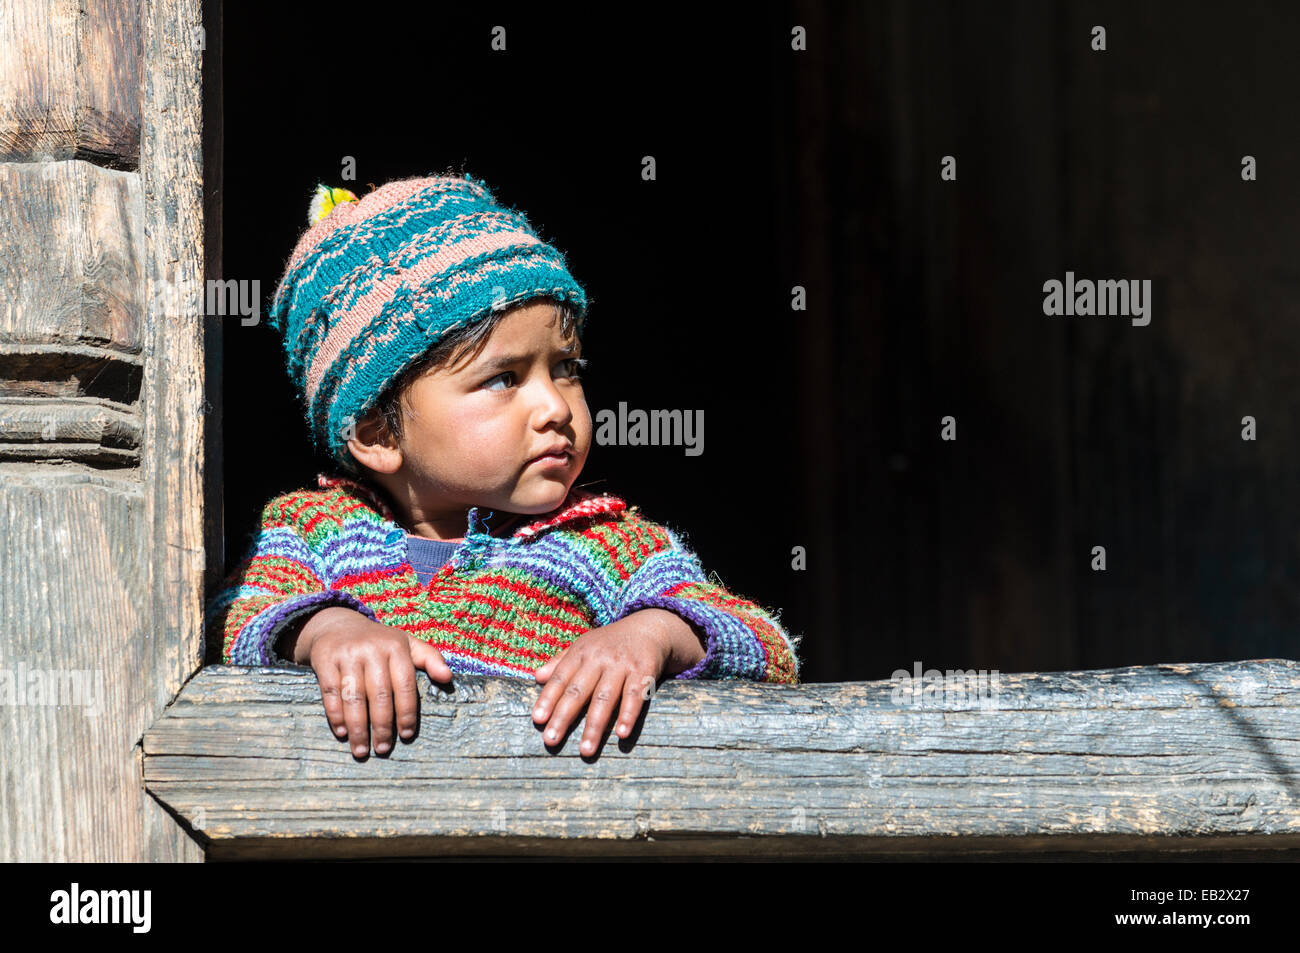 A small child looking out of the window of a wooden house, Chitkul, Himachal Pradesh, India Stock Photo